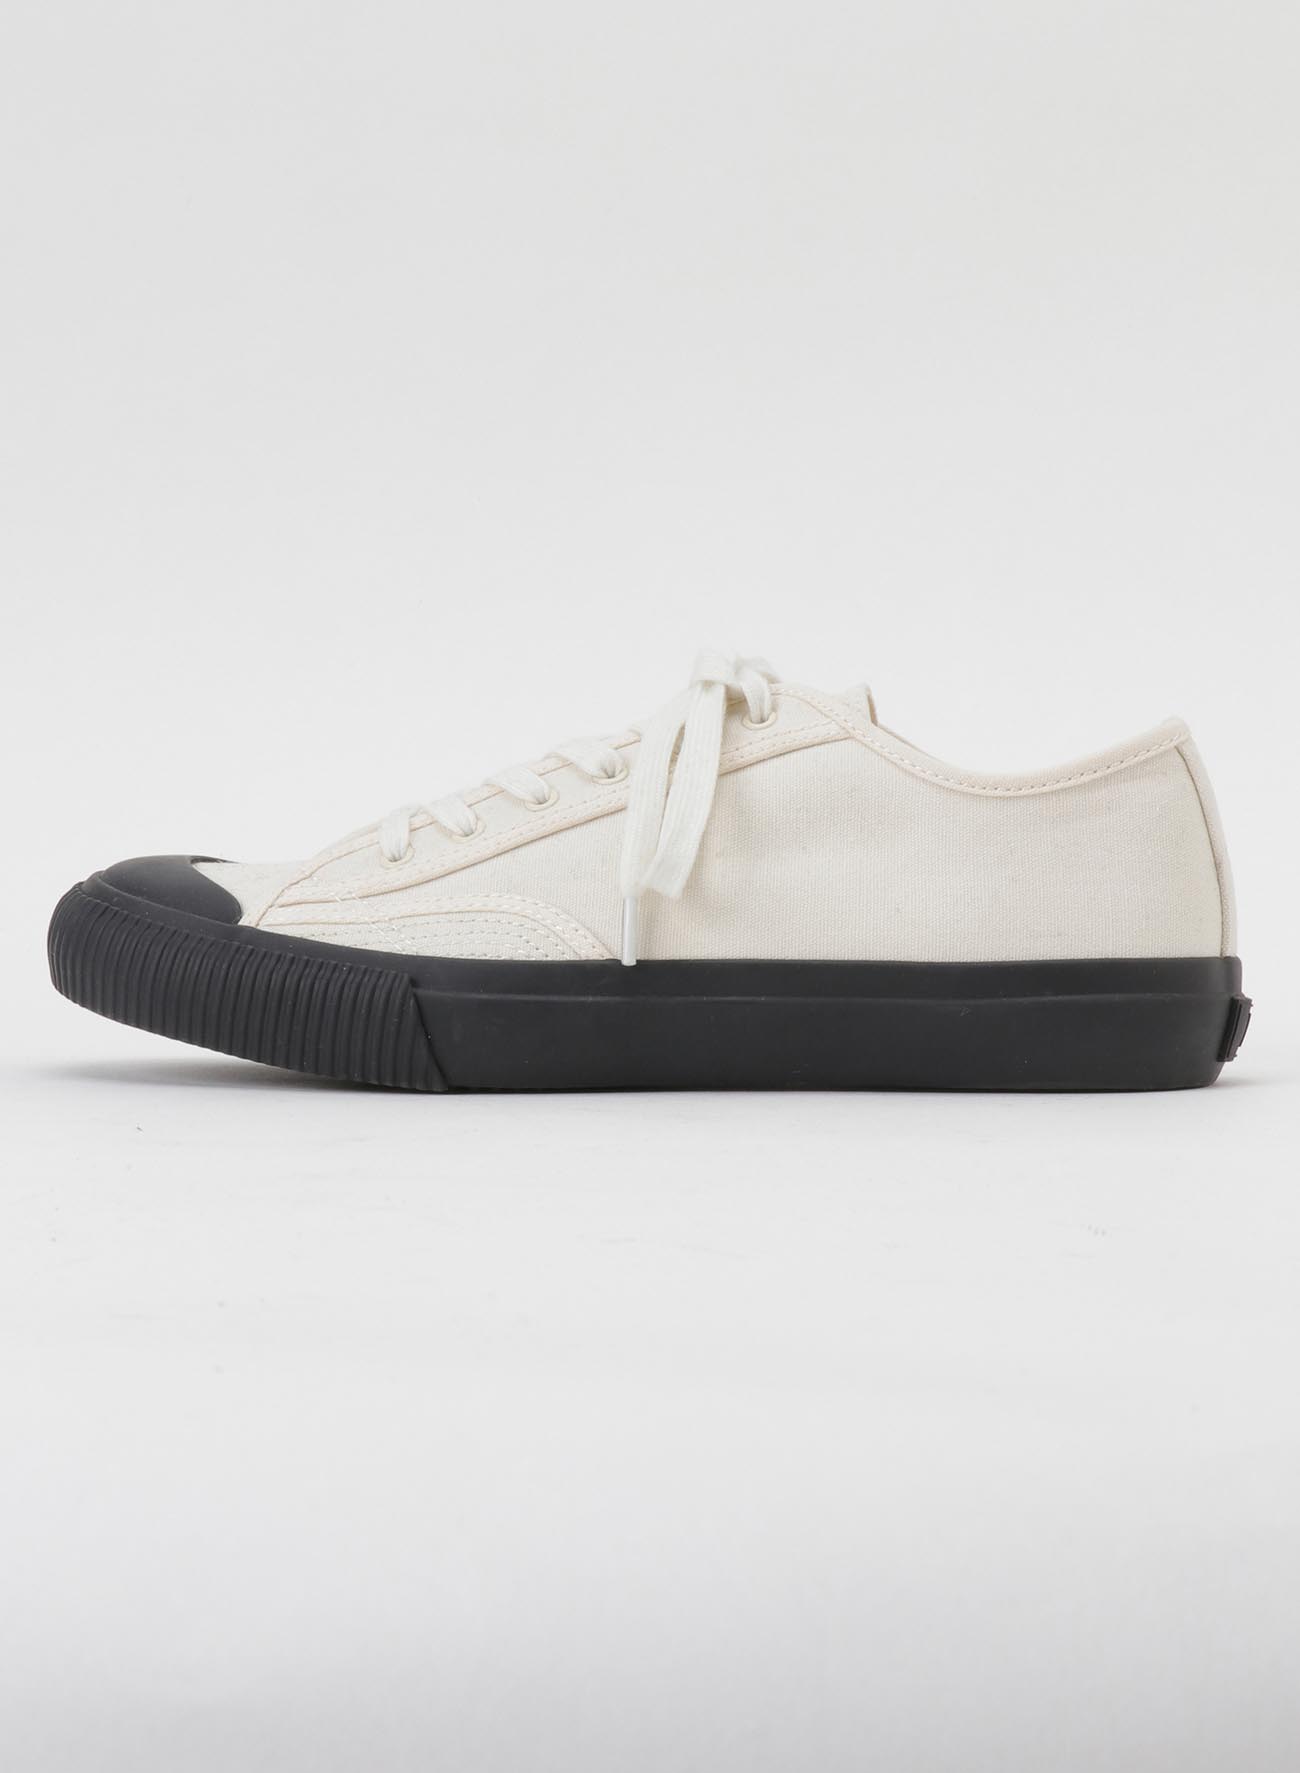 NO.9 CANVAS FLAT SNEAKERS